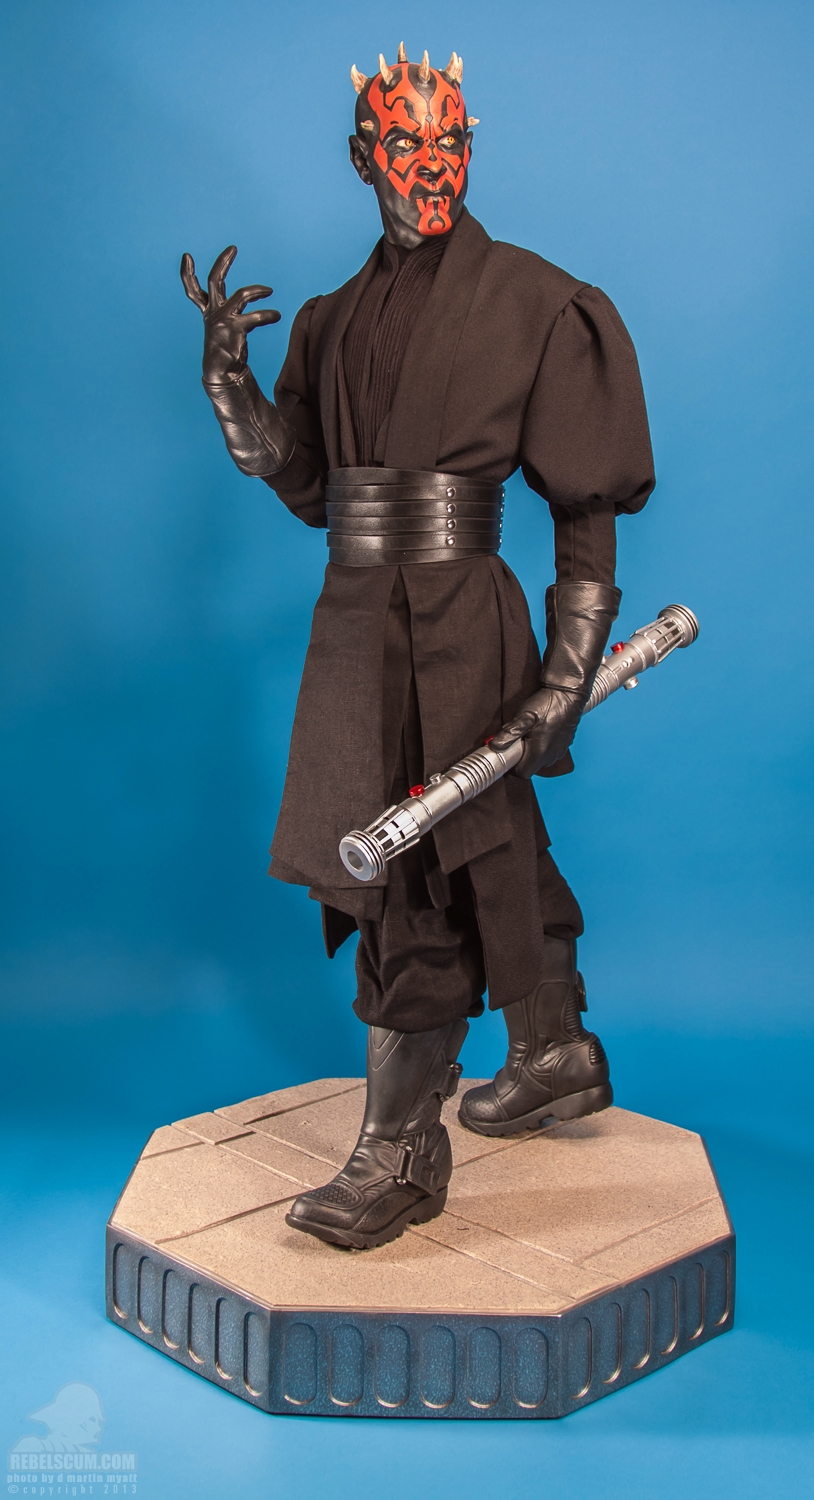 Darth_Maul_Legendary_Scale_Figure_Sideshow_Collectibles-01.jpg